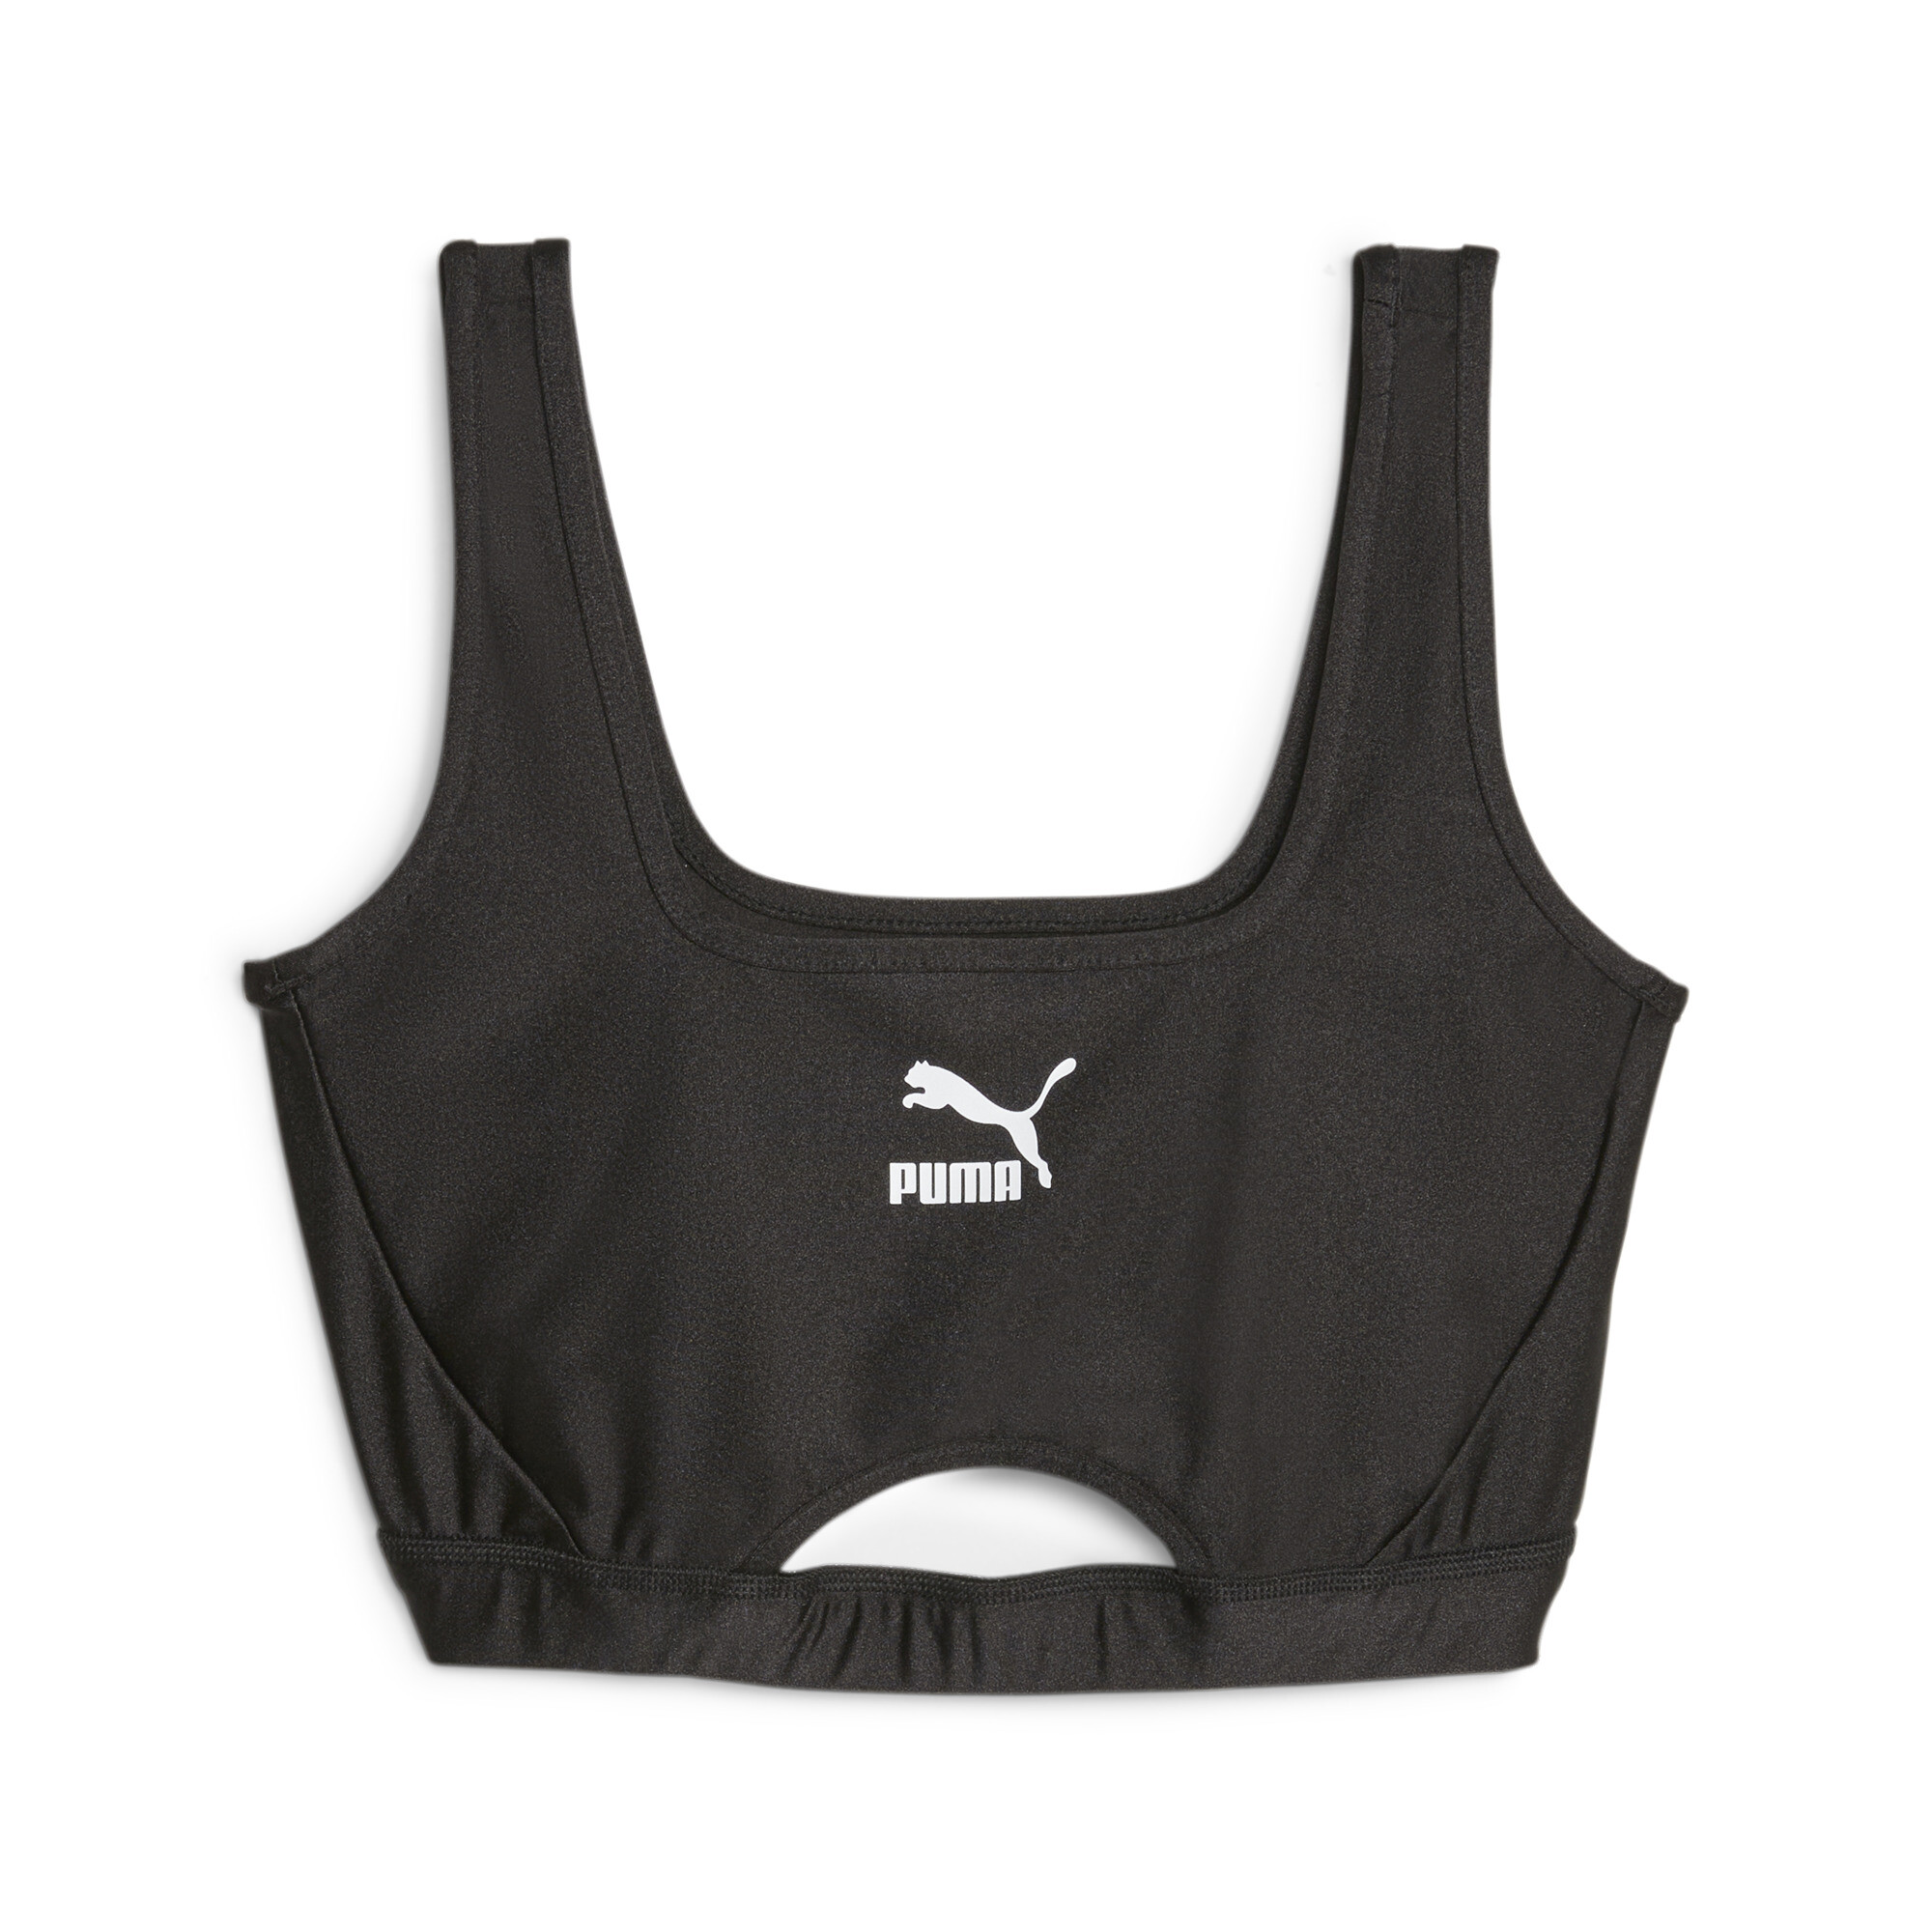 Women's Puma DARE TO's Crop Top, Black, Size S, Clothing